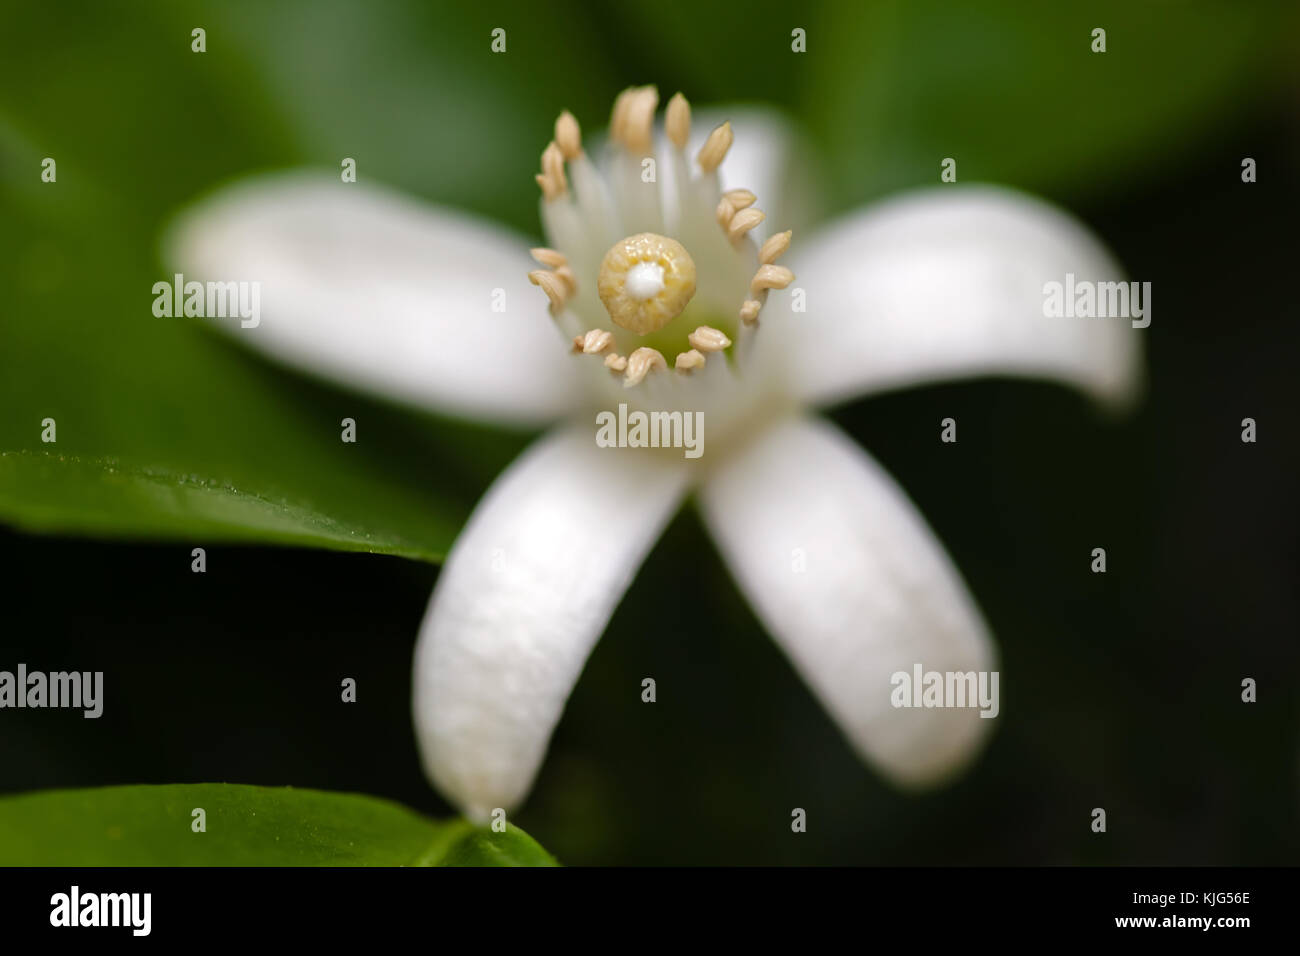 White Orange Blossom among leaves. Extreme close up macro with a view of the flower anatomy Very shallow depth of field white closeup blossoms flowers Stock Photo